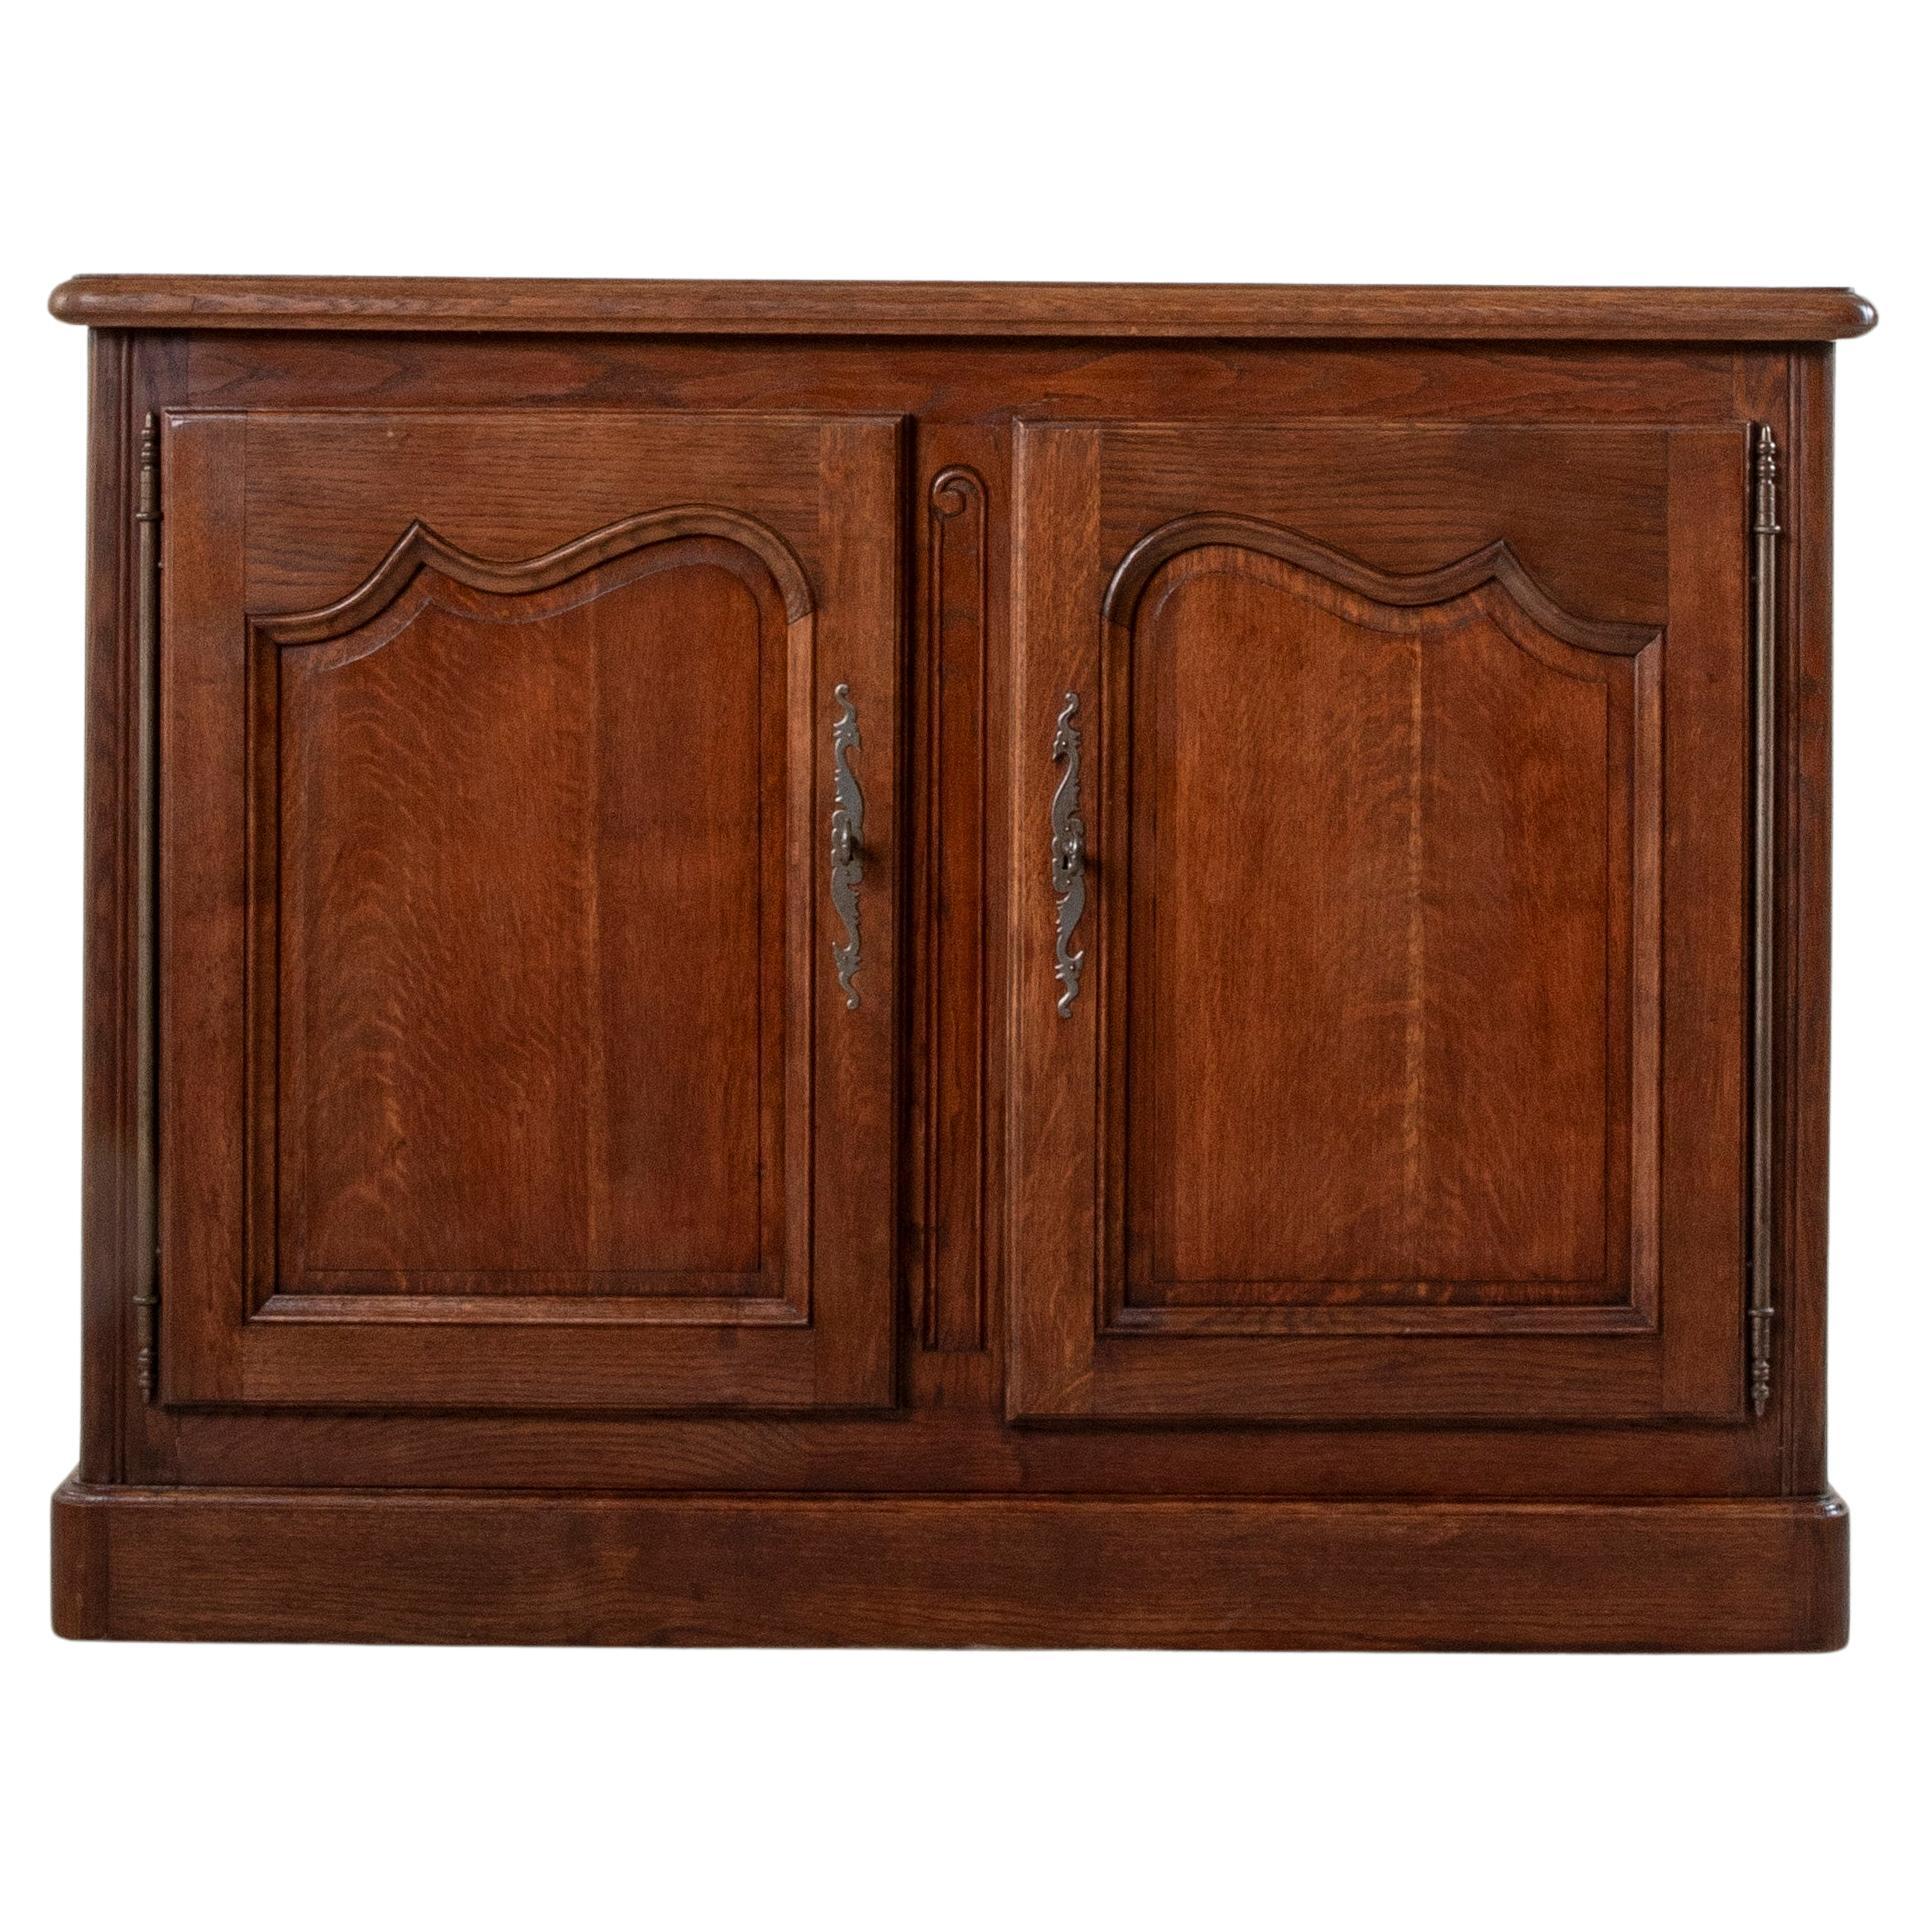 Early 20th Century French Louis XIV Style Oak Buffet, Sideboard, 16-inch Depth For Sale